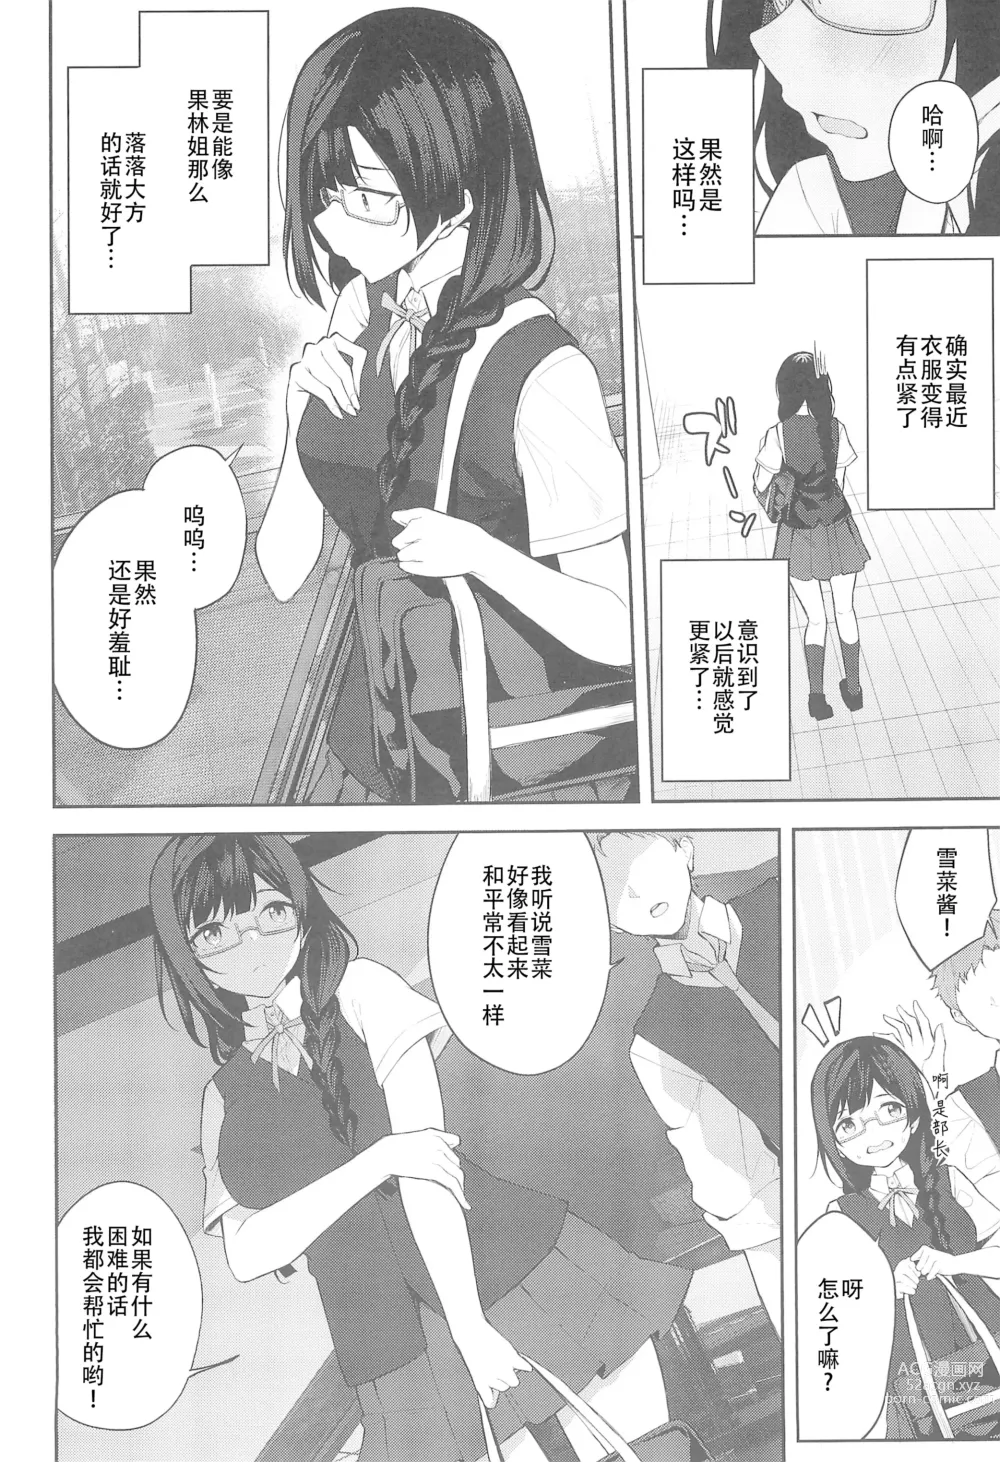 Page 5 of doujinshi Sunny Scarlet